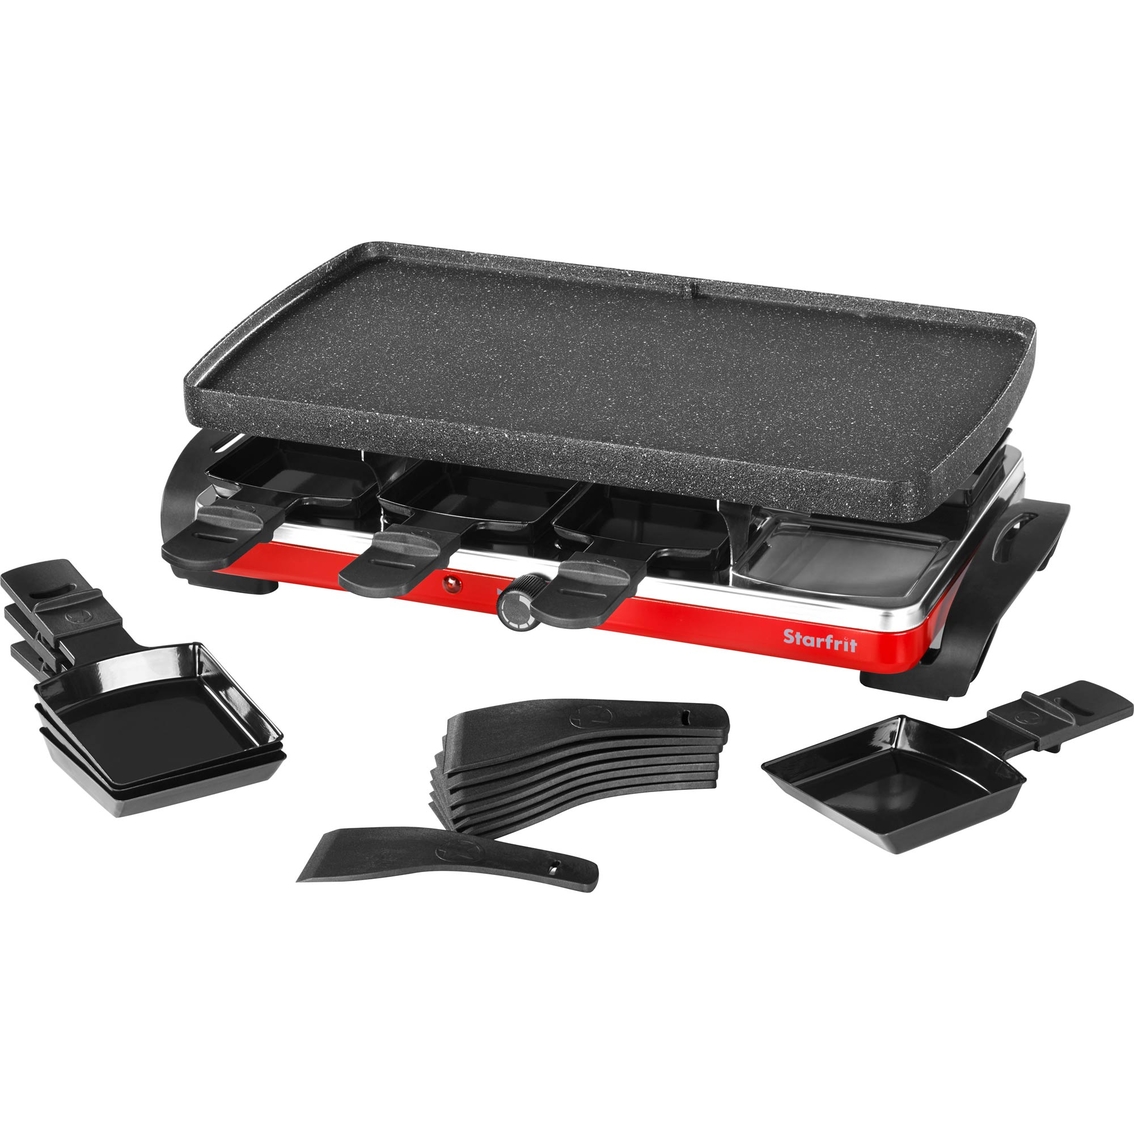 Starfrit The Rock Raclette Party Grill Set - Image 4 of 6